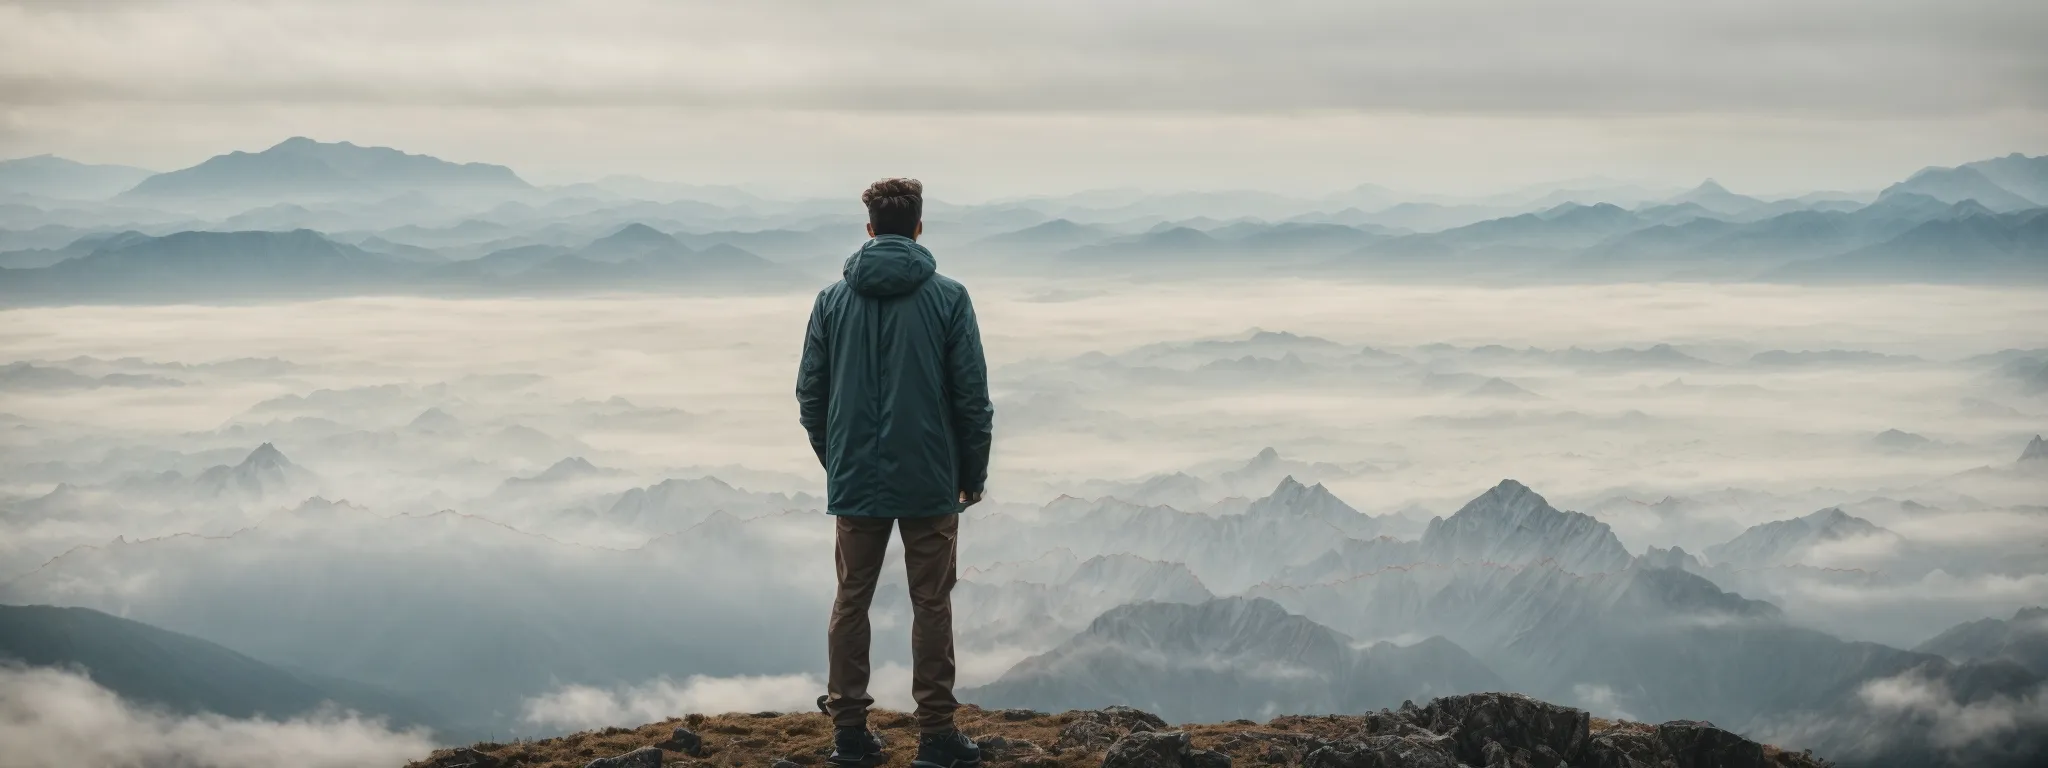 a person standing on a mountain peak gazing at a vast digital landscape of graphs and charts stretching out into the horizon.